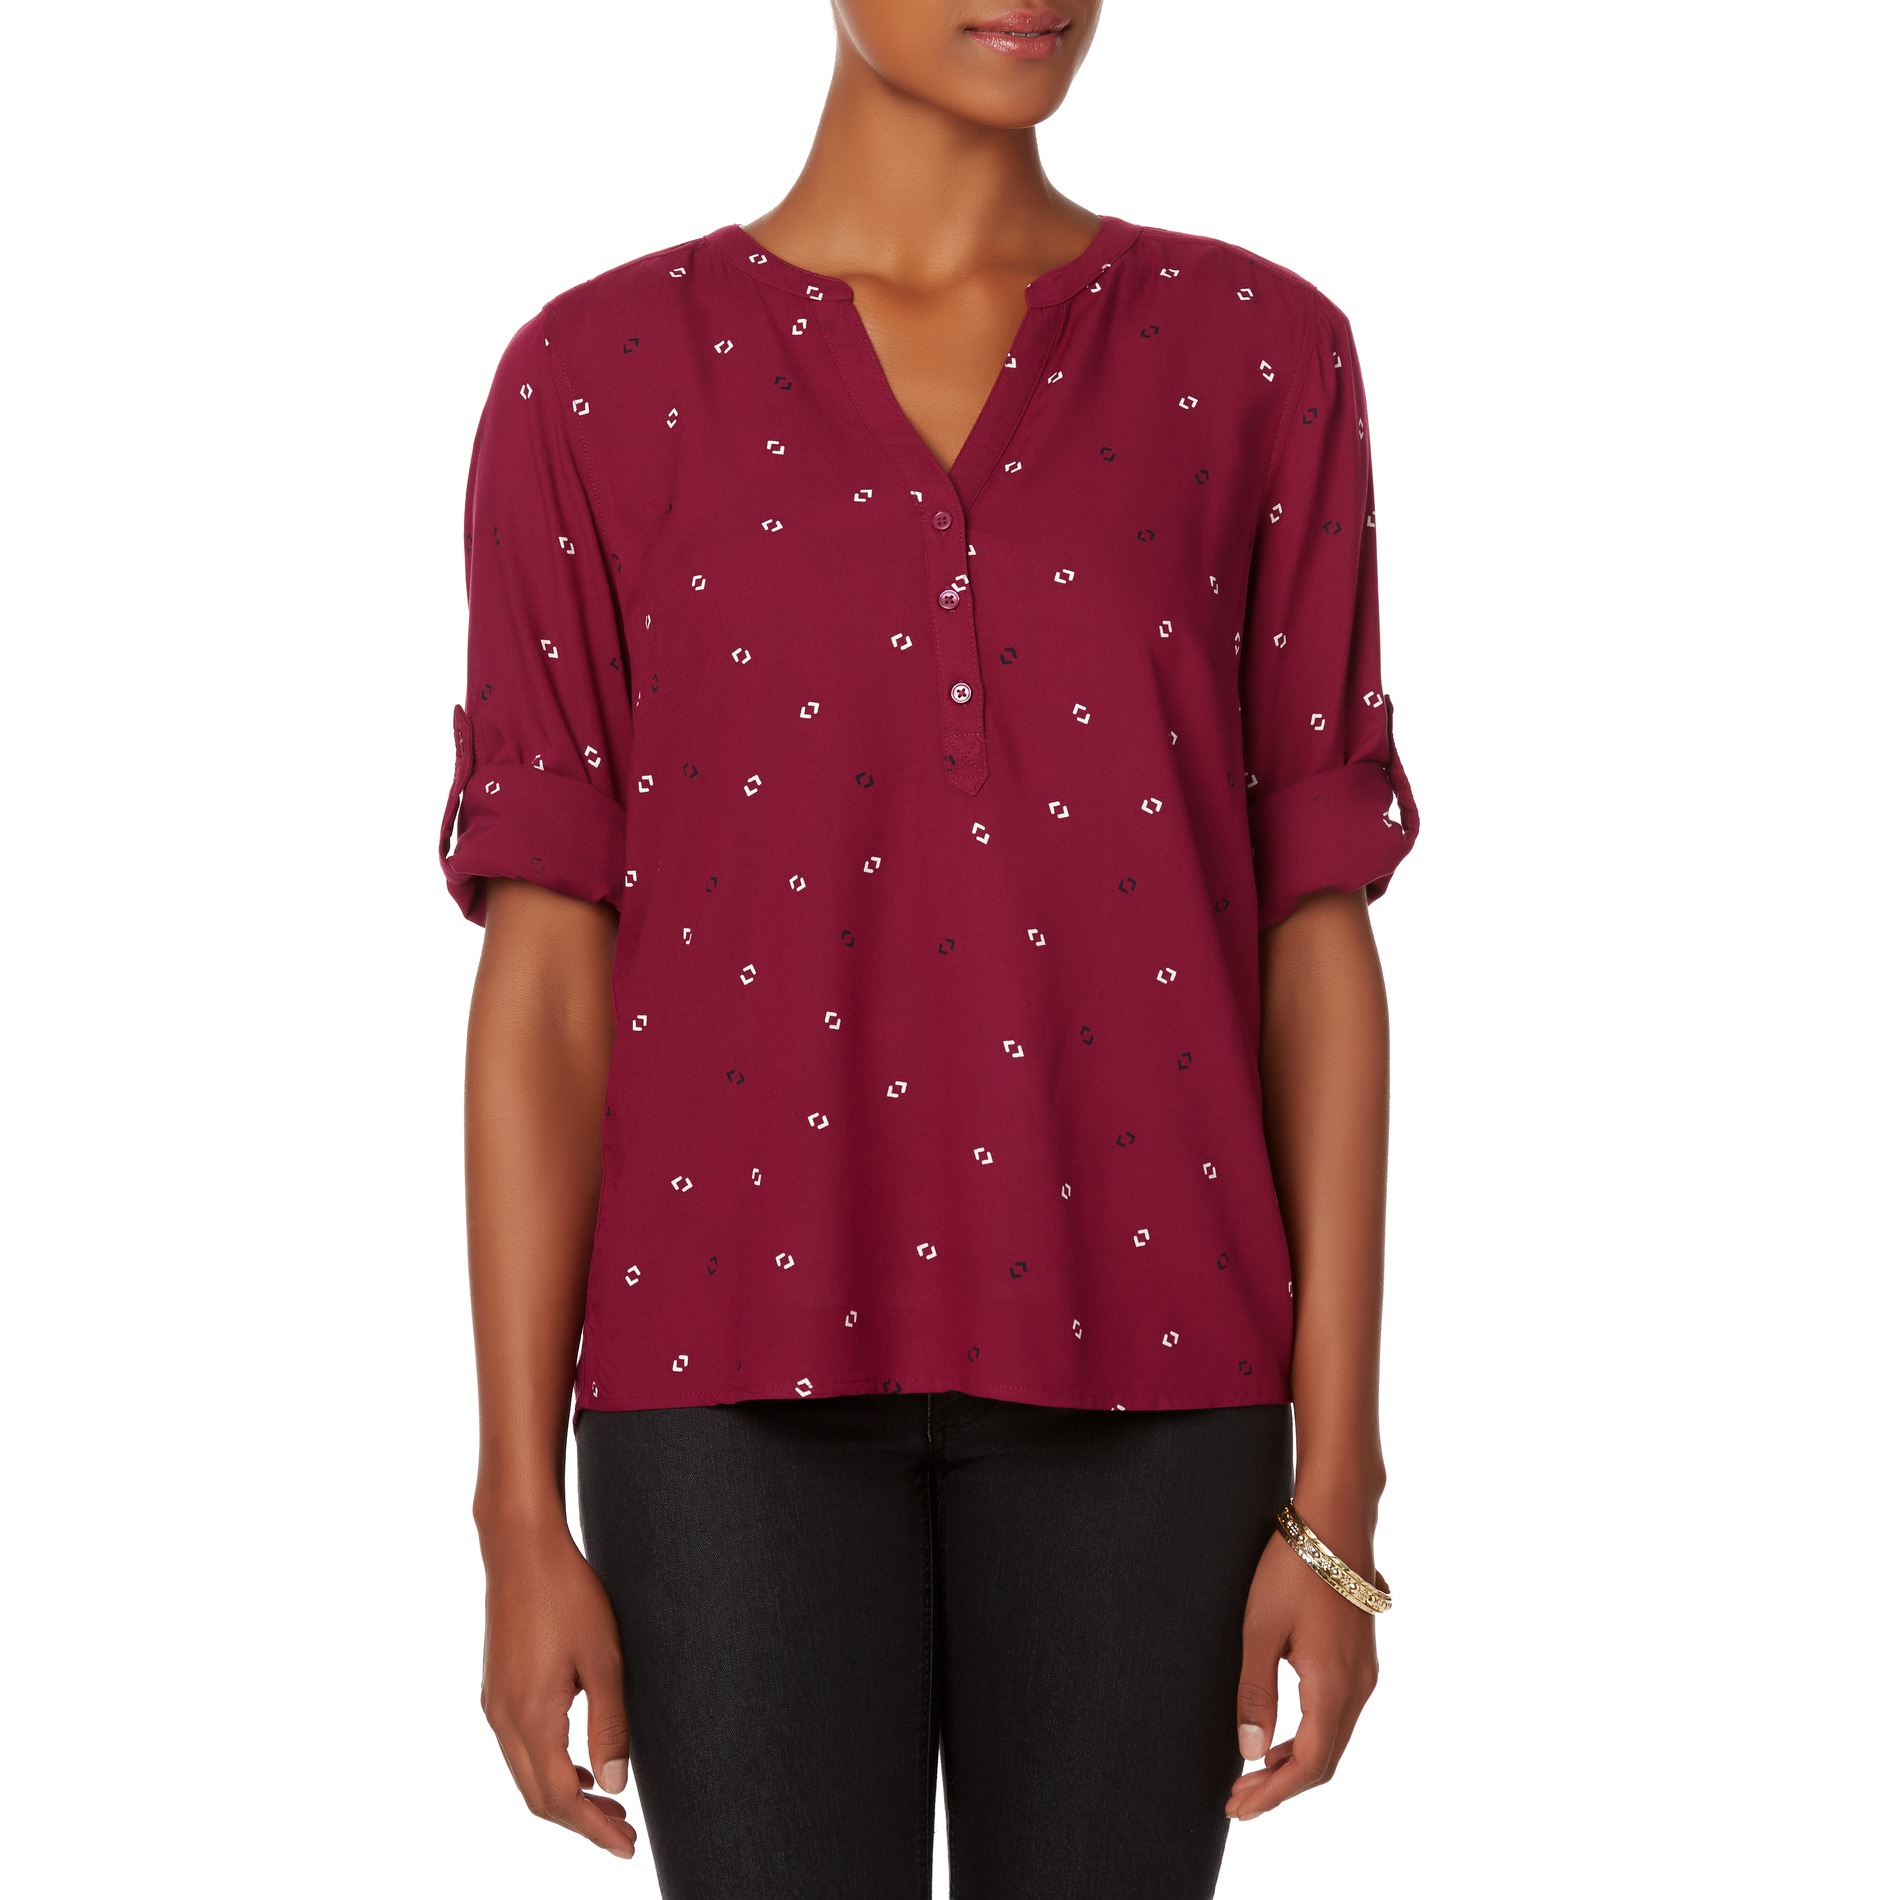 Simply Styled Women's Blouse - Arrow